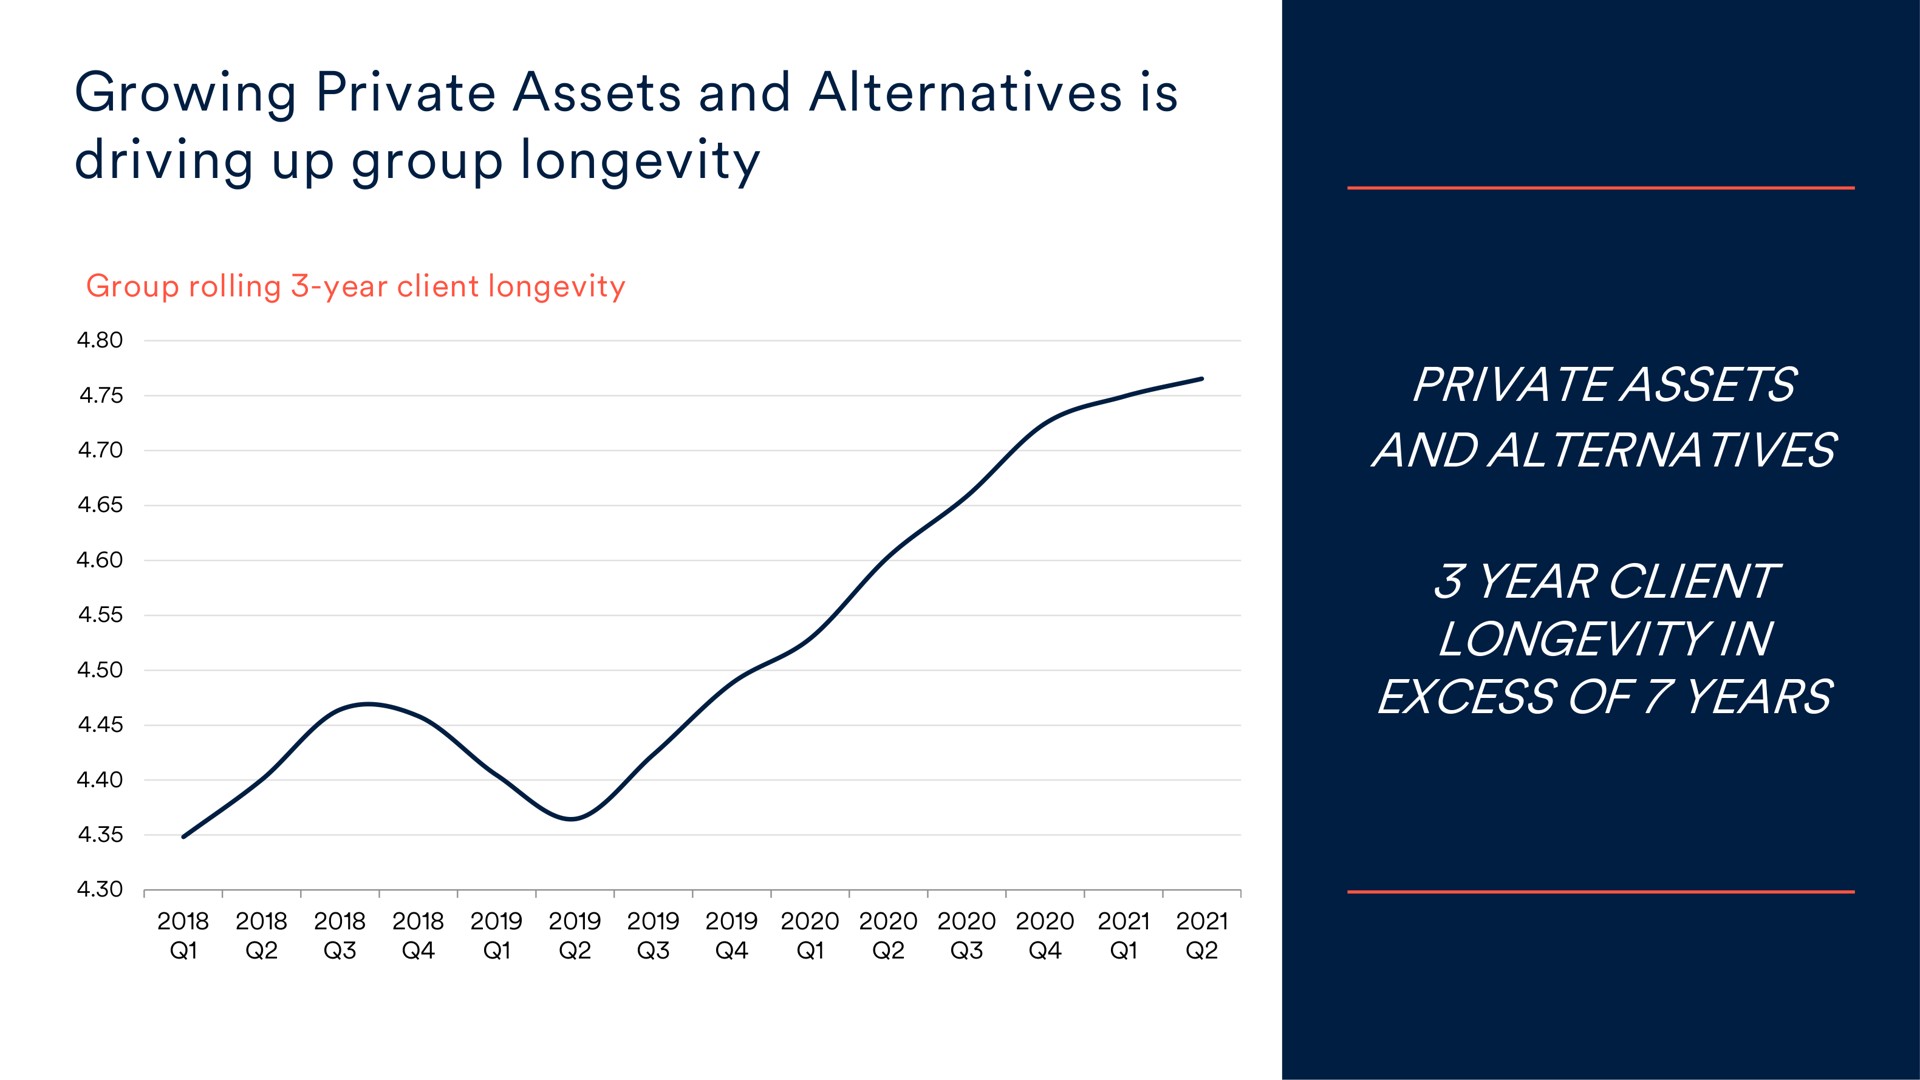 growing private assets and alternatives is driving up group longevity ans i has year client men excess of years | Schroders